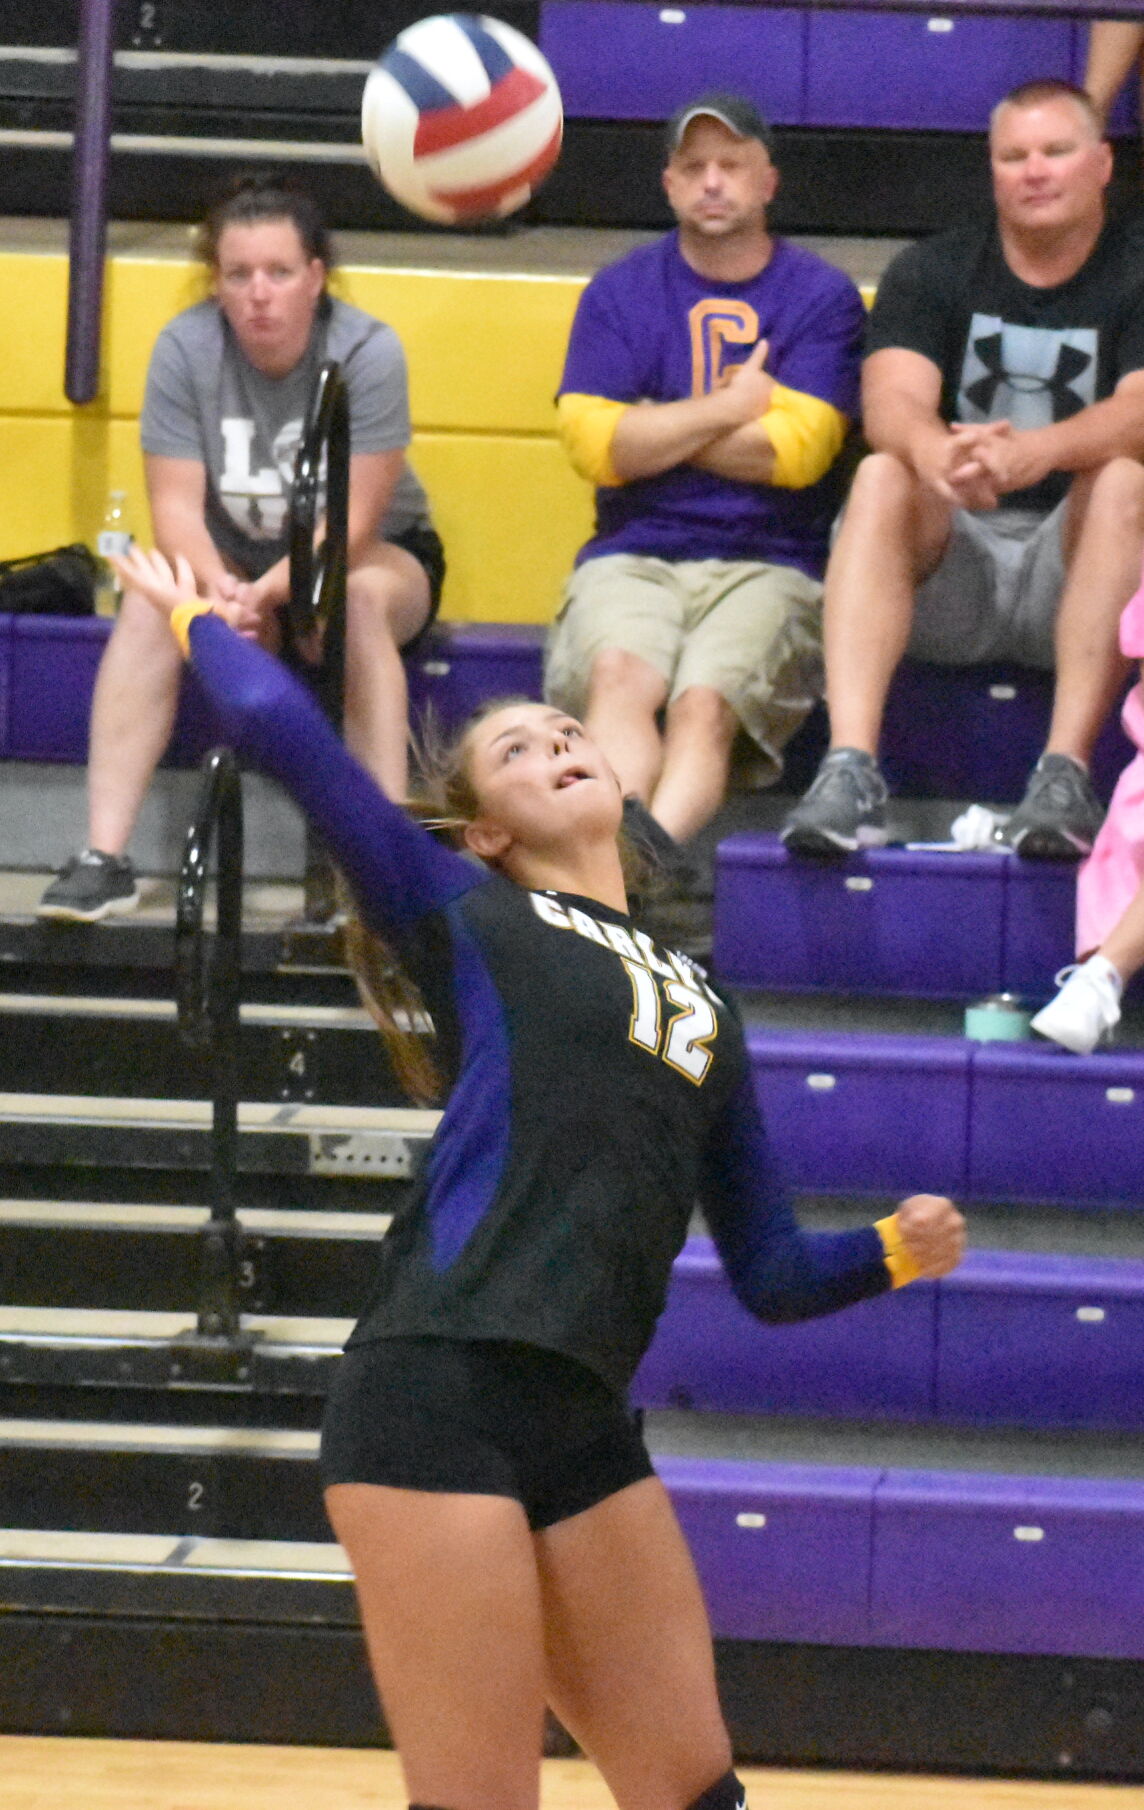 Caryye Volleyball Team’s Winning Streak Continues, Led by Raelyn Harris’ Impressive Performance